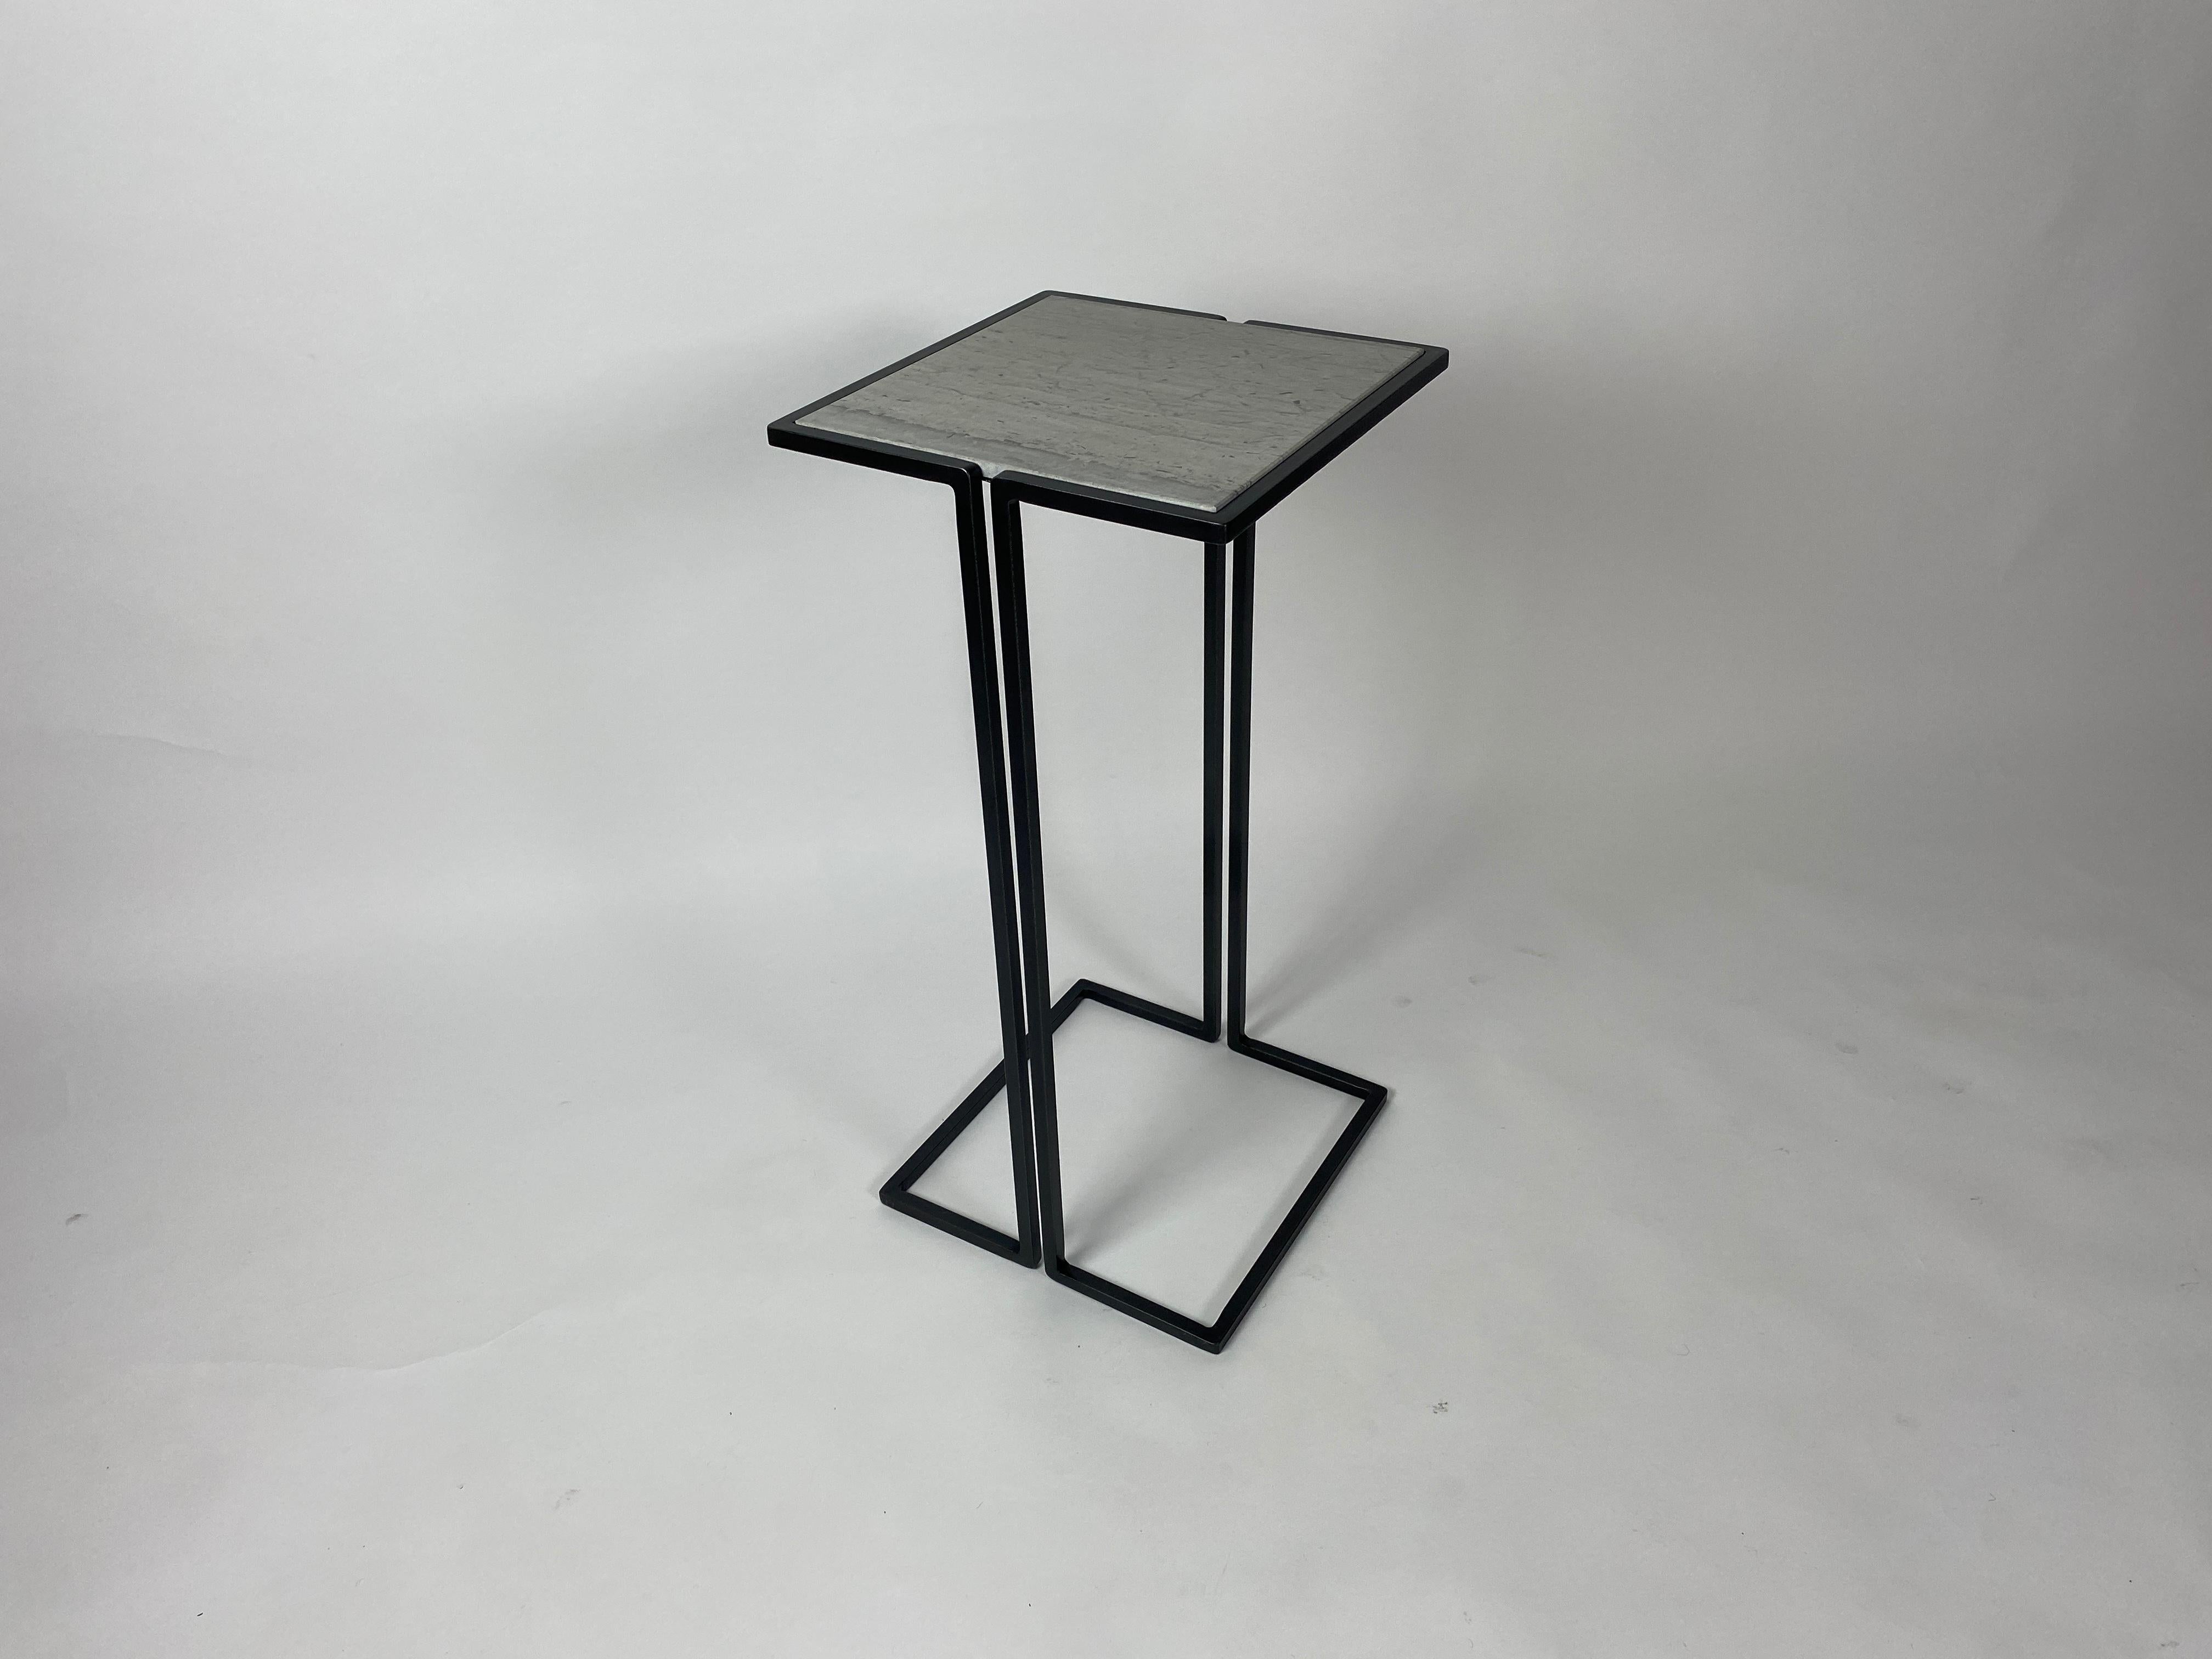 Two small-scale side tables.
Minimalist design with gun metal patina frames and polished linac marble tops.
Versatile tables, perfect for cocktails, laptops. These side tables nestle nicely around the arms of chairs to provide a nice sized